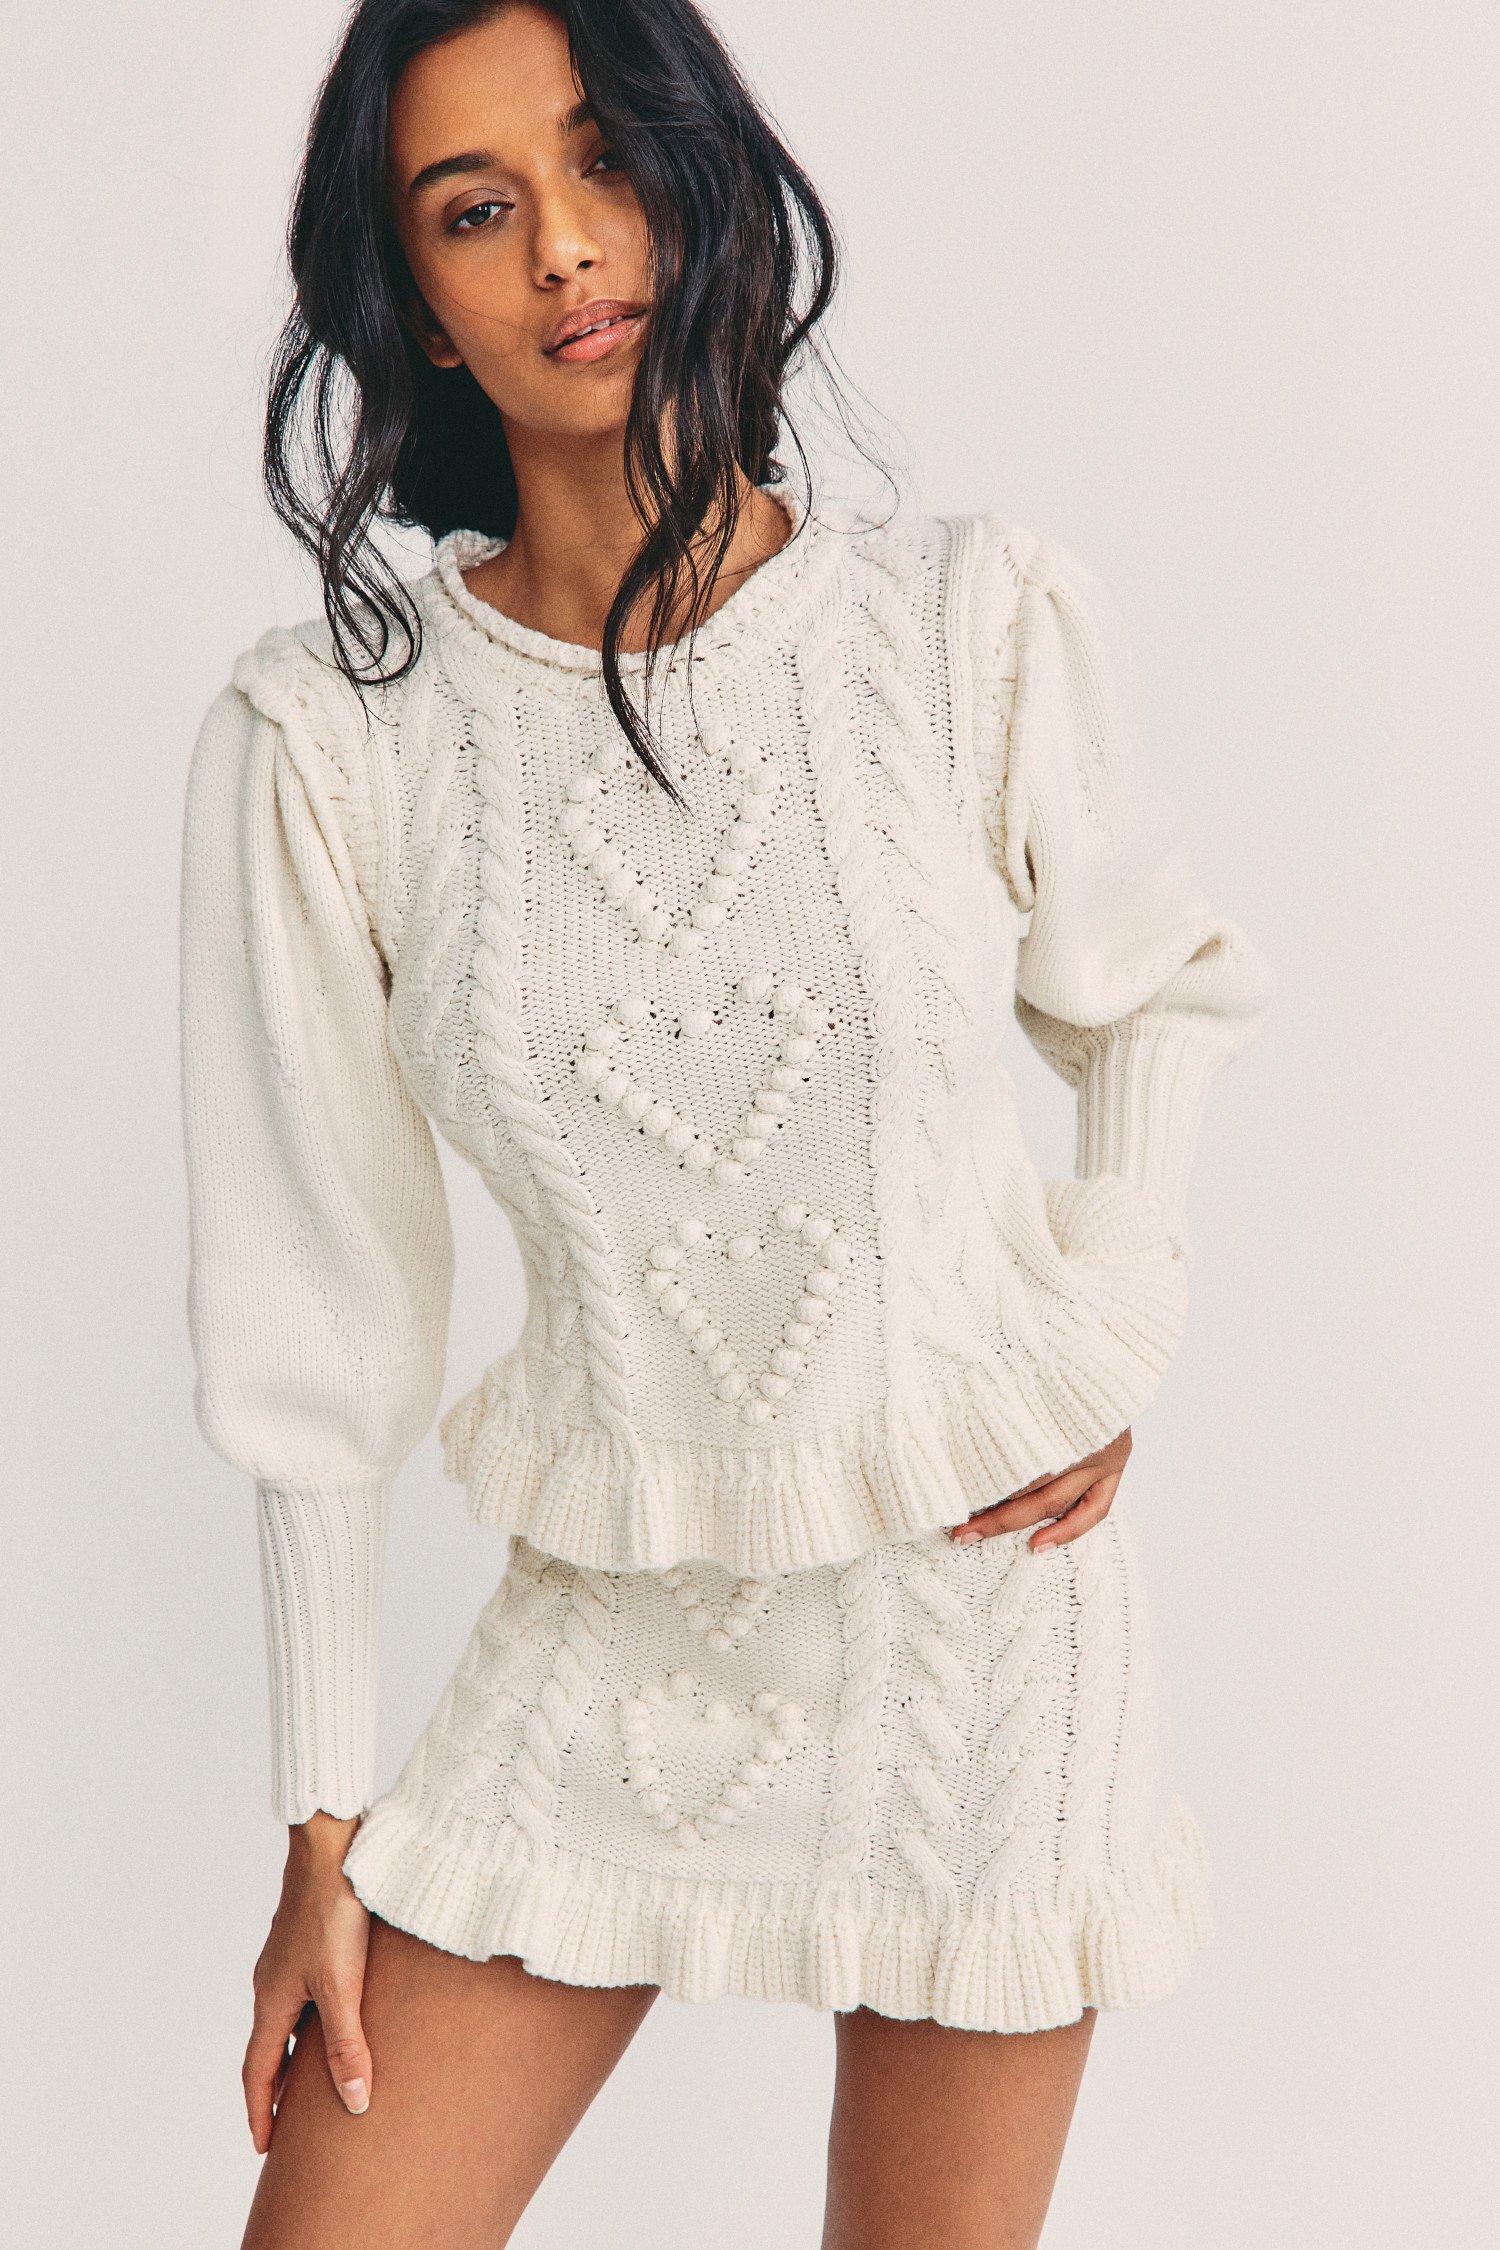 $385 Calantha Pullover Sweater - LOVE SHACK FANCY